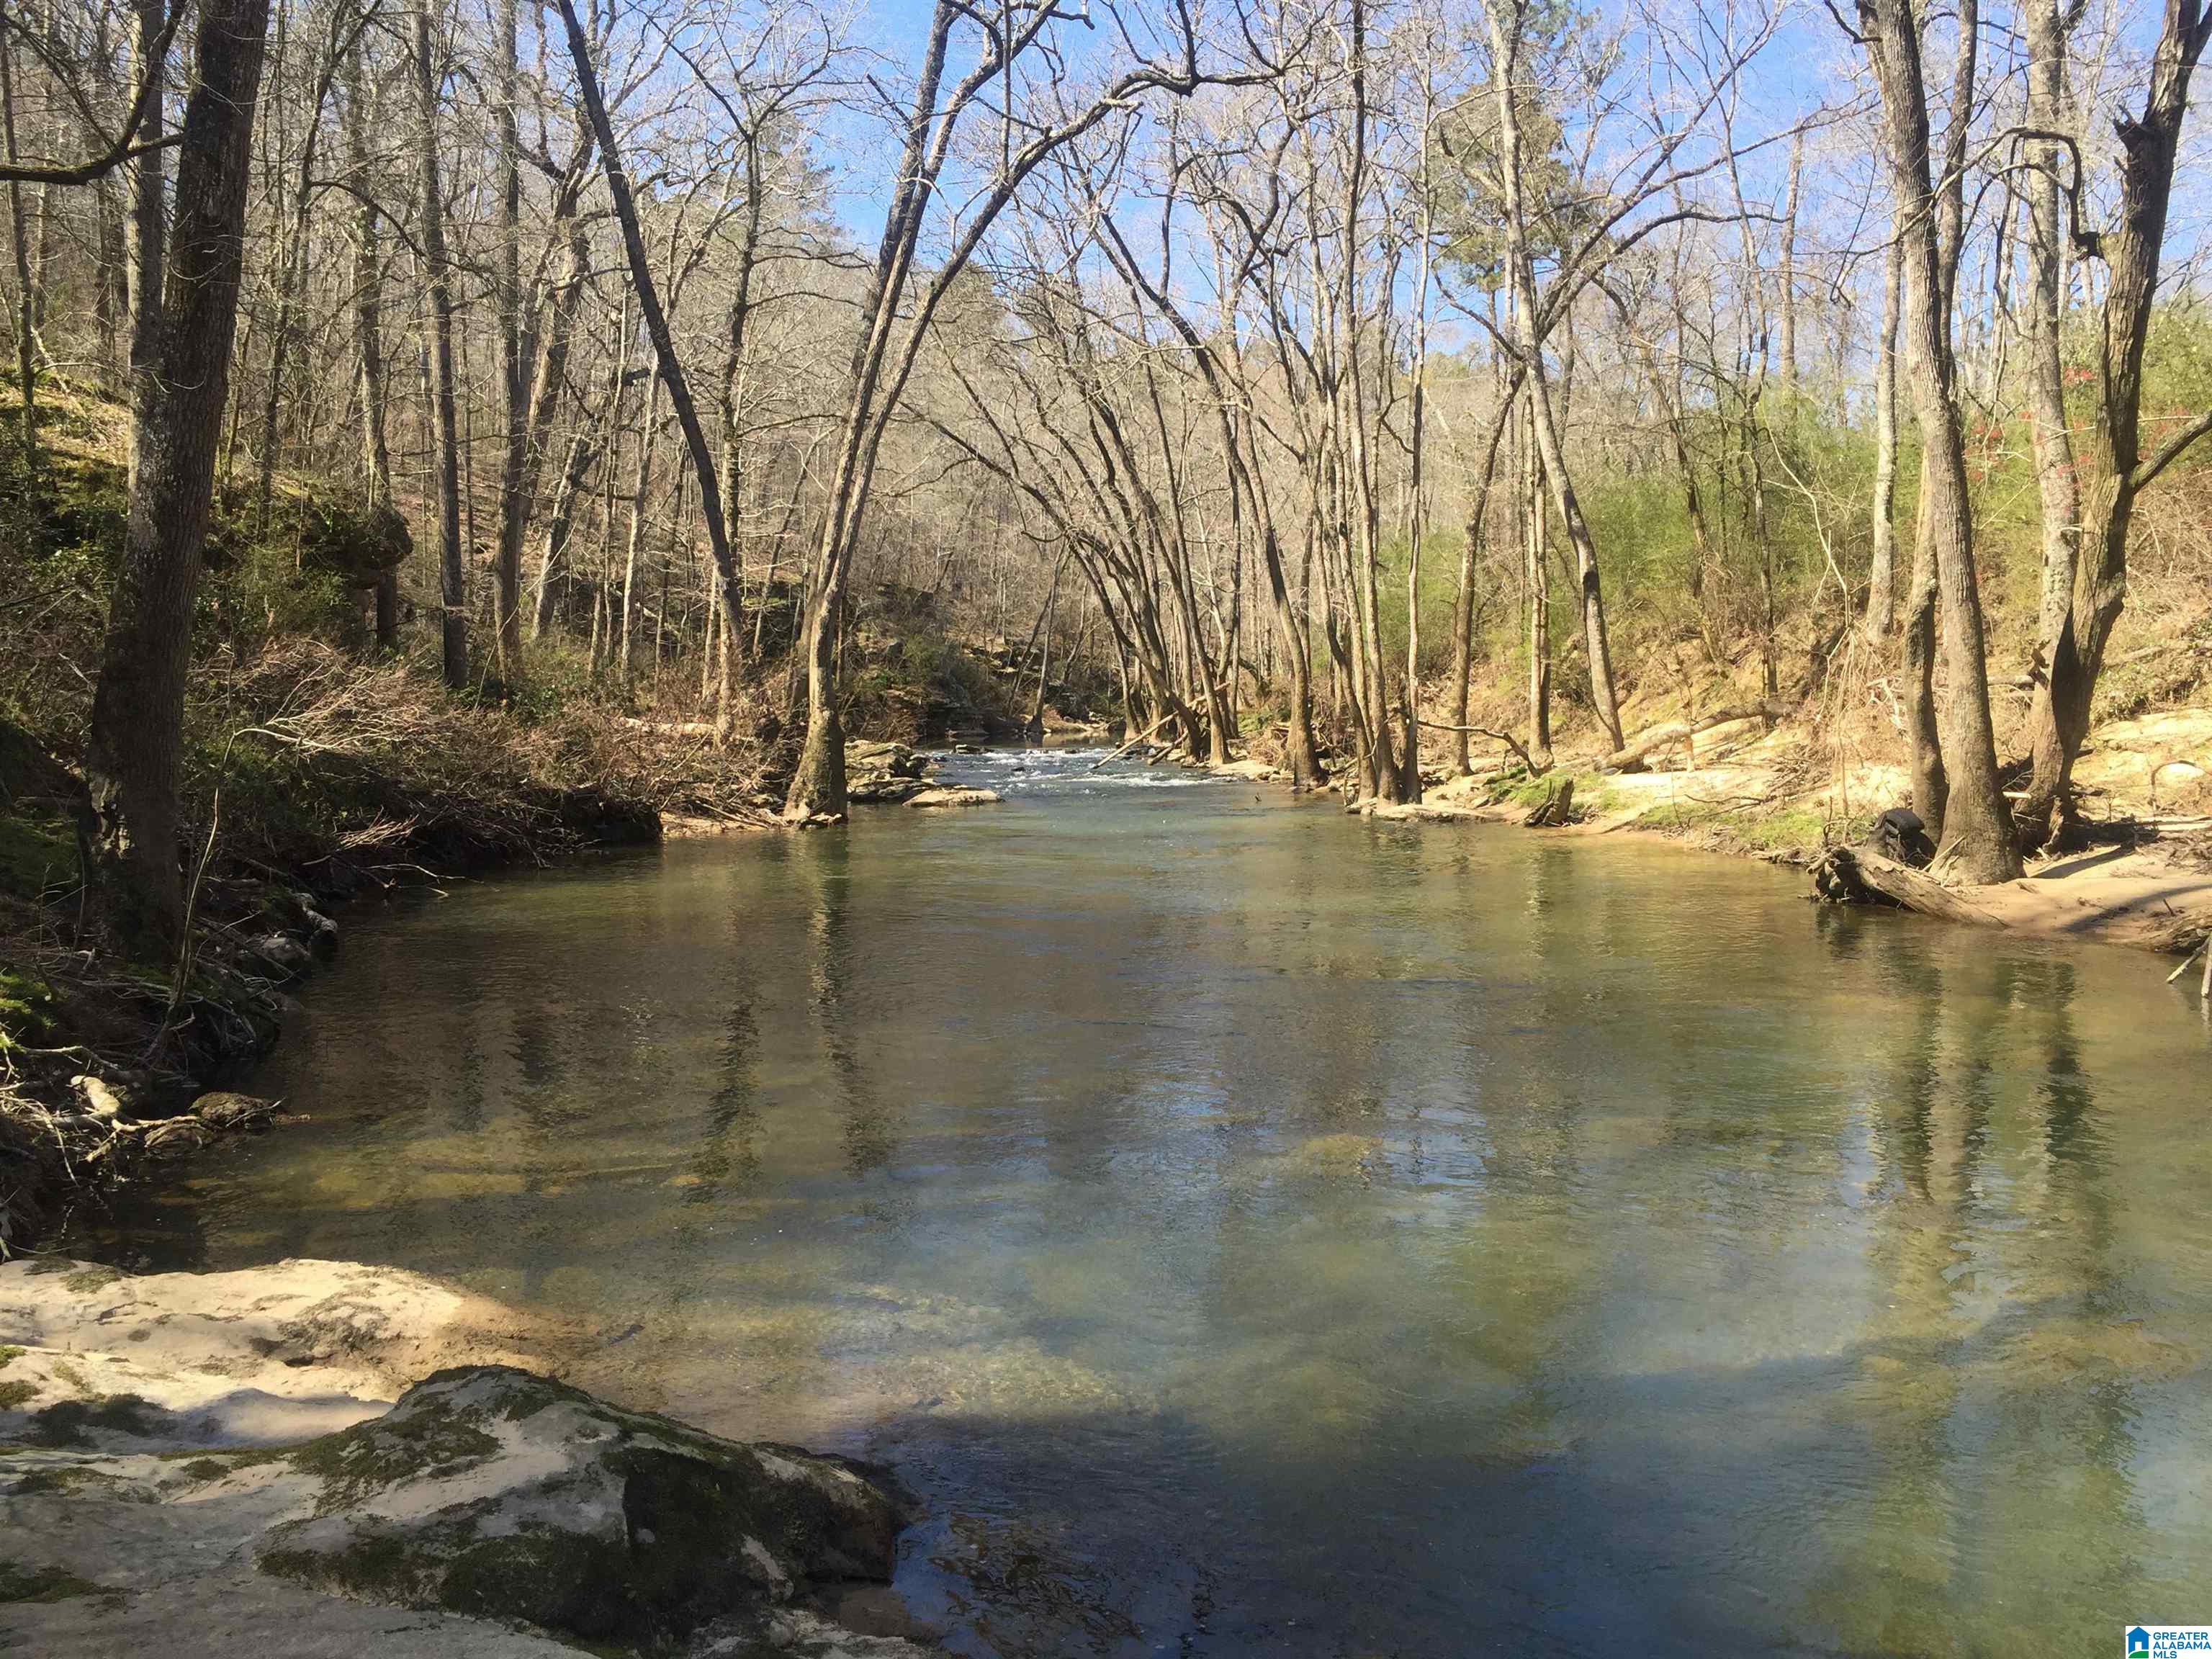 Welcome to 31 acres of exceptional land that offers water frontage on the Mulberry Fork River, bluff views, scenic trails for hiking or riding horse back, pasture/ open fields, fencing, RV hookup and deck for a relaxing get away just off Hwy 67.